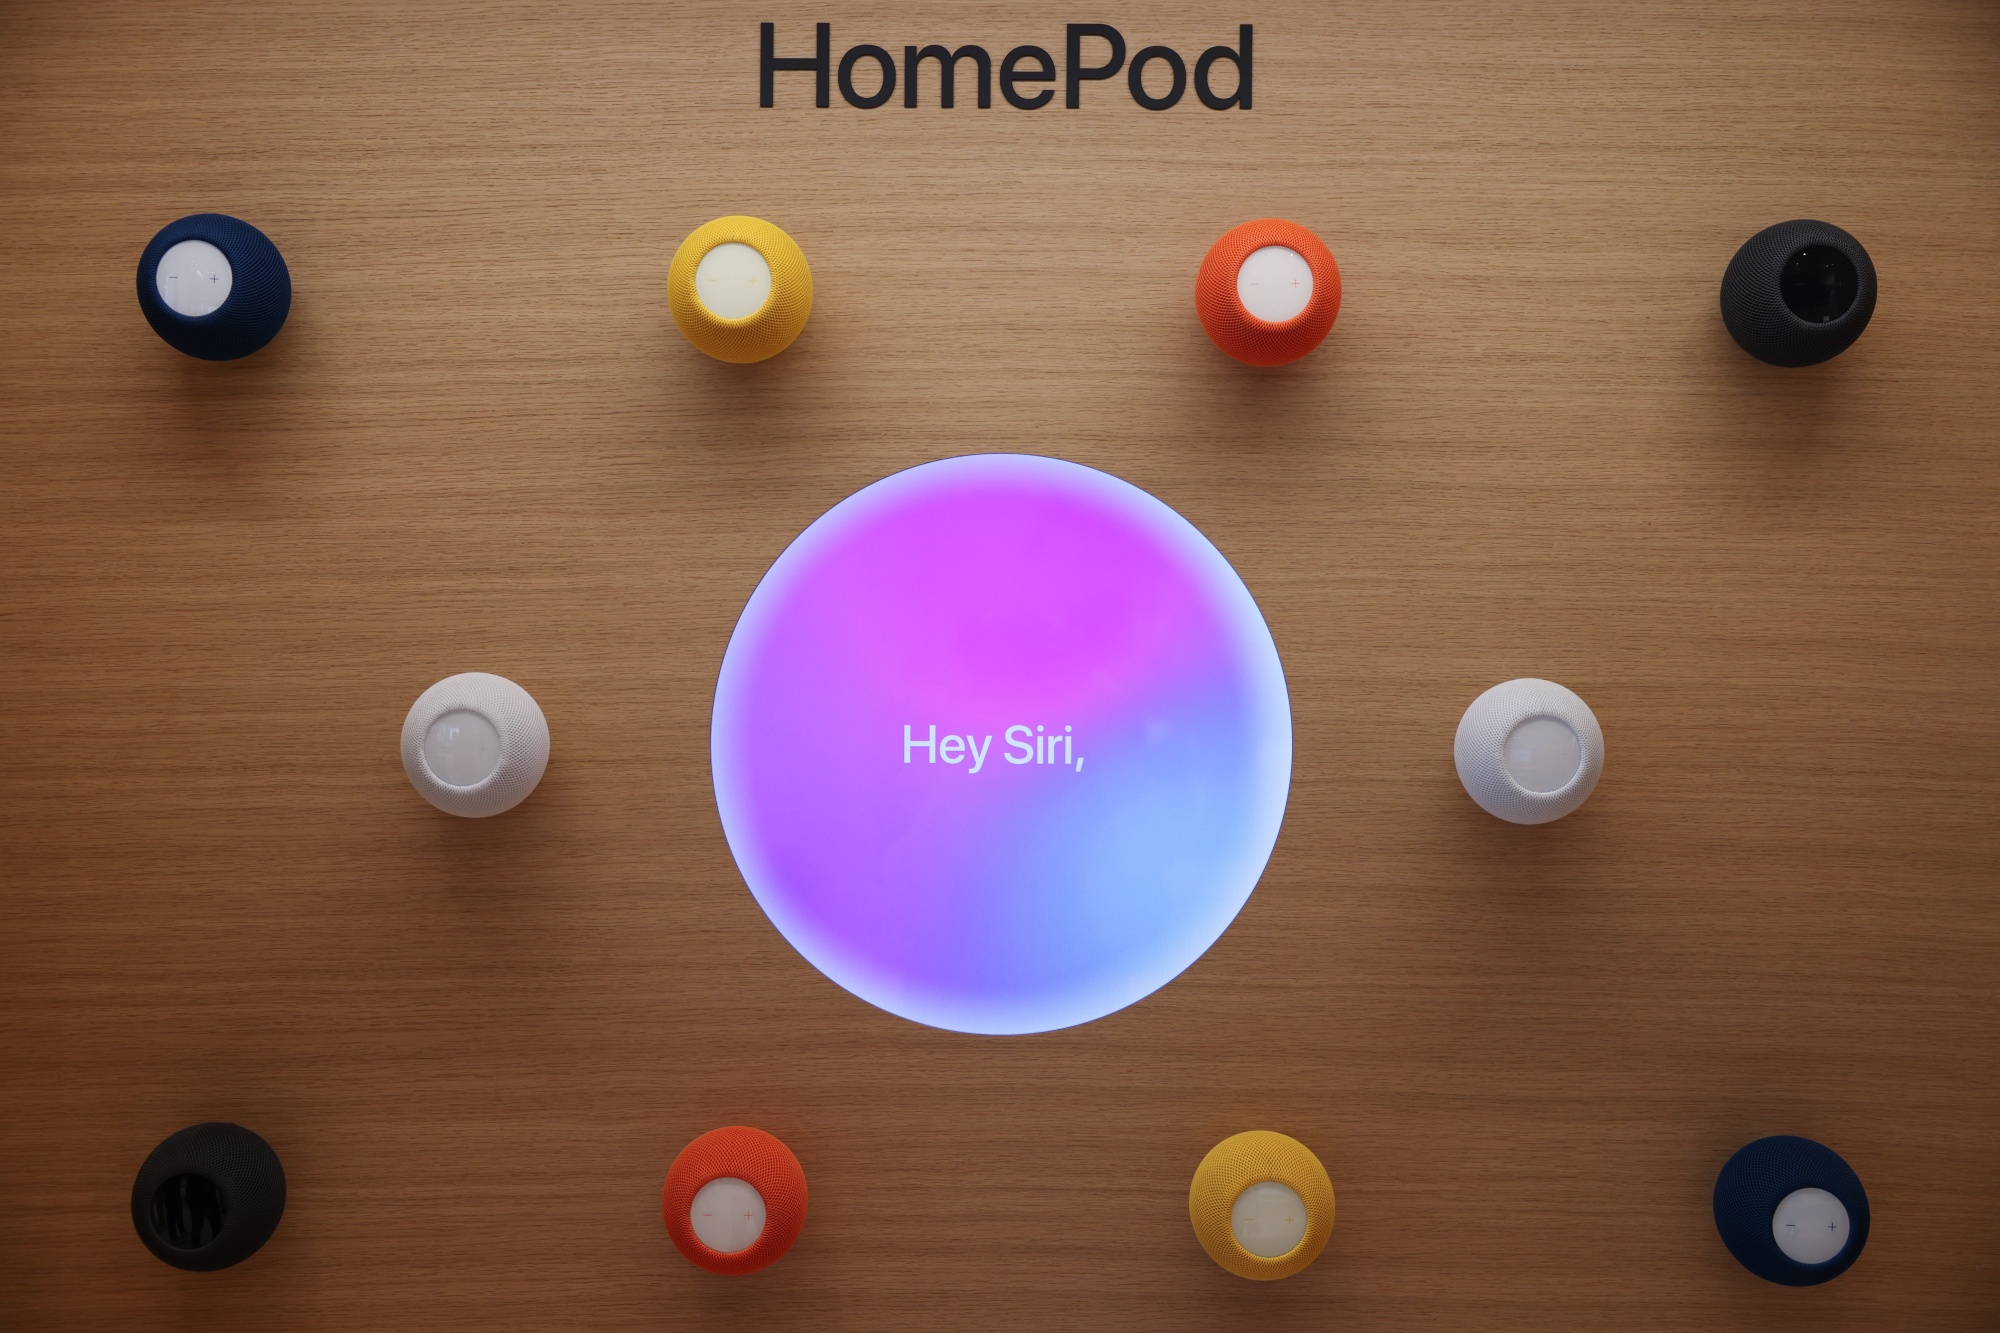 HomePod section at an Apple retail store.